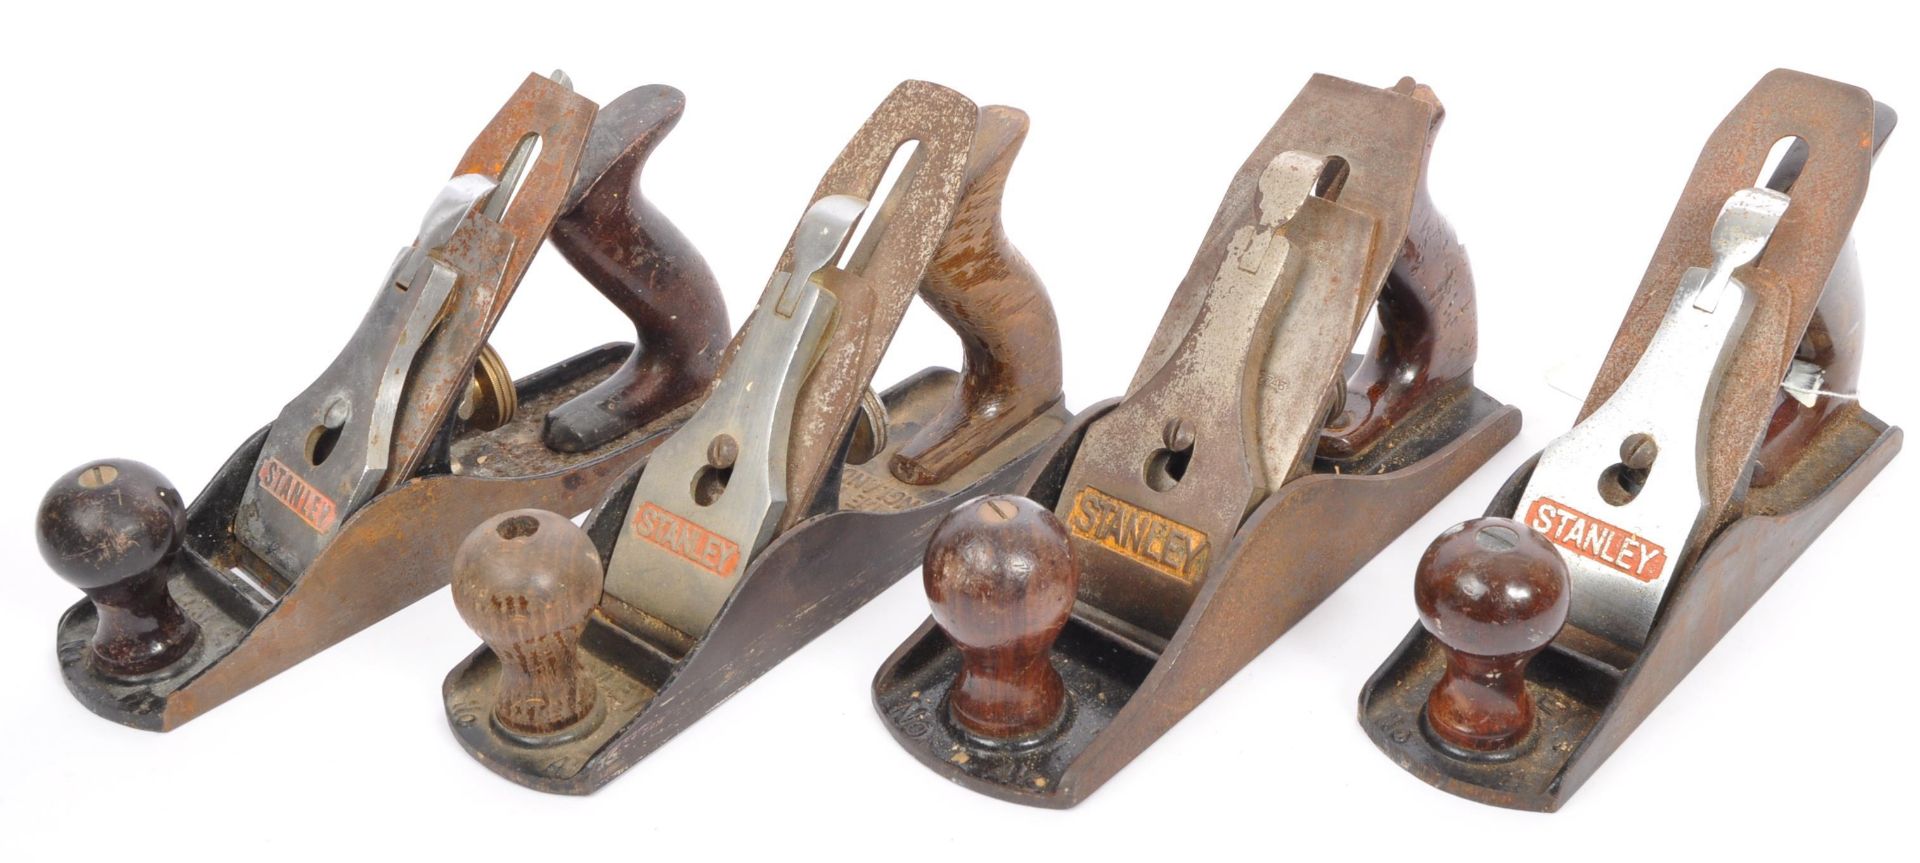 FOUR VINTAGE 20TH CENTURY STANLEY WOOD BENCH PLANES - Image 2 of 7